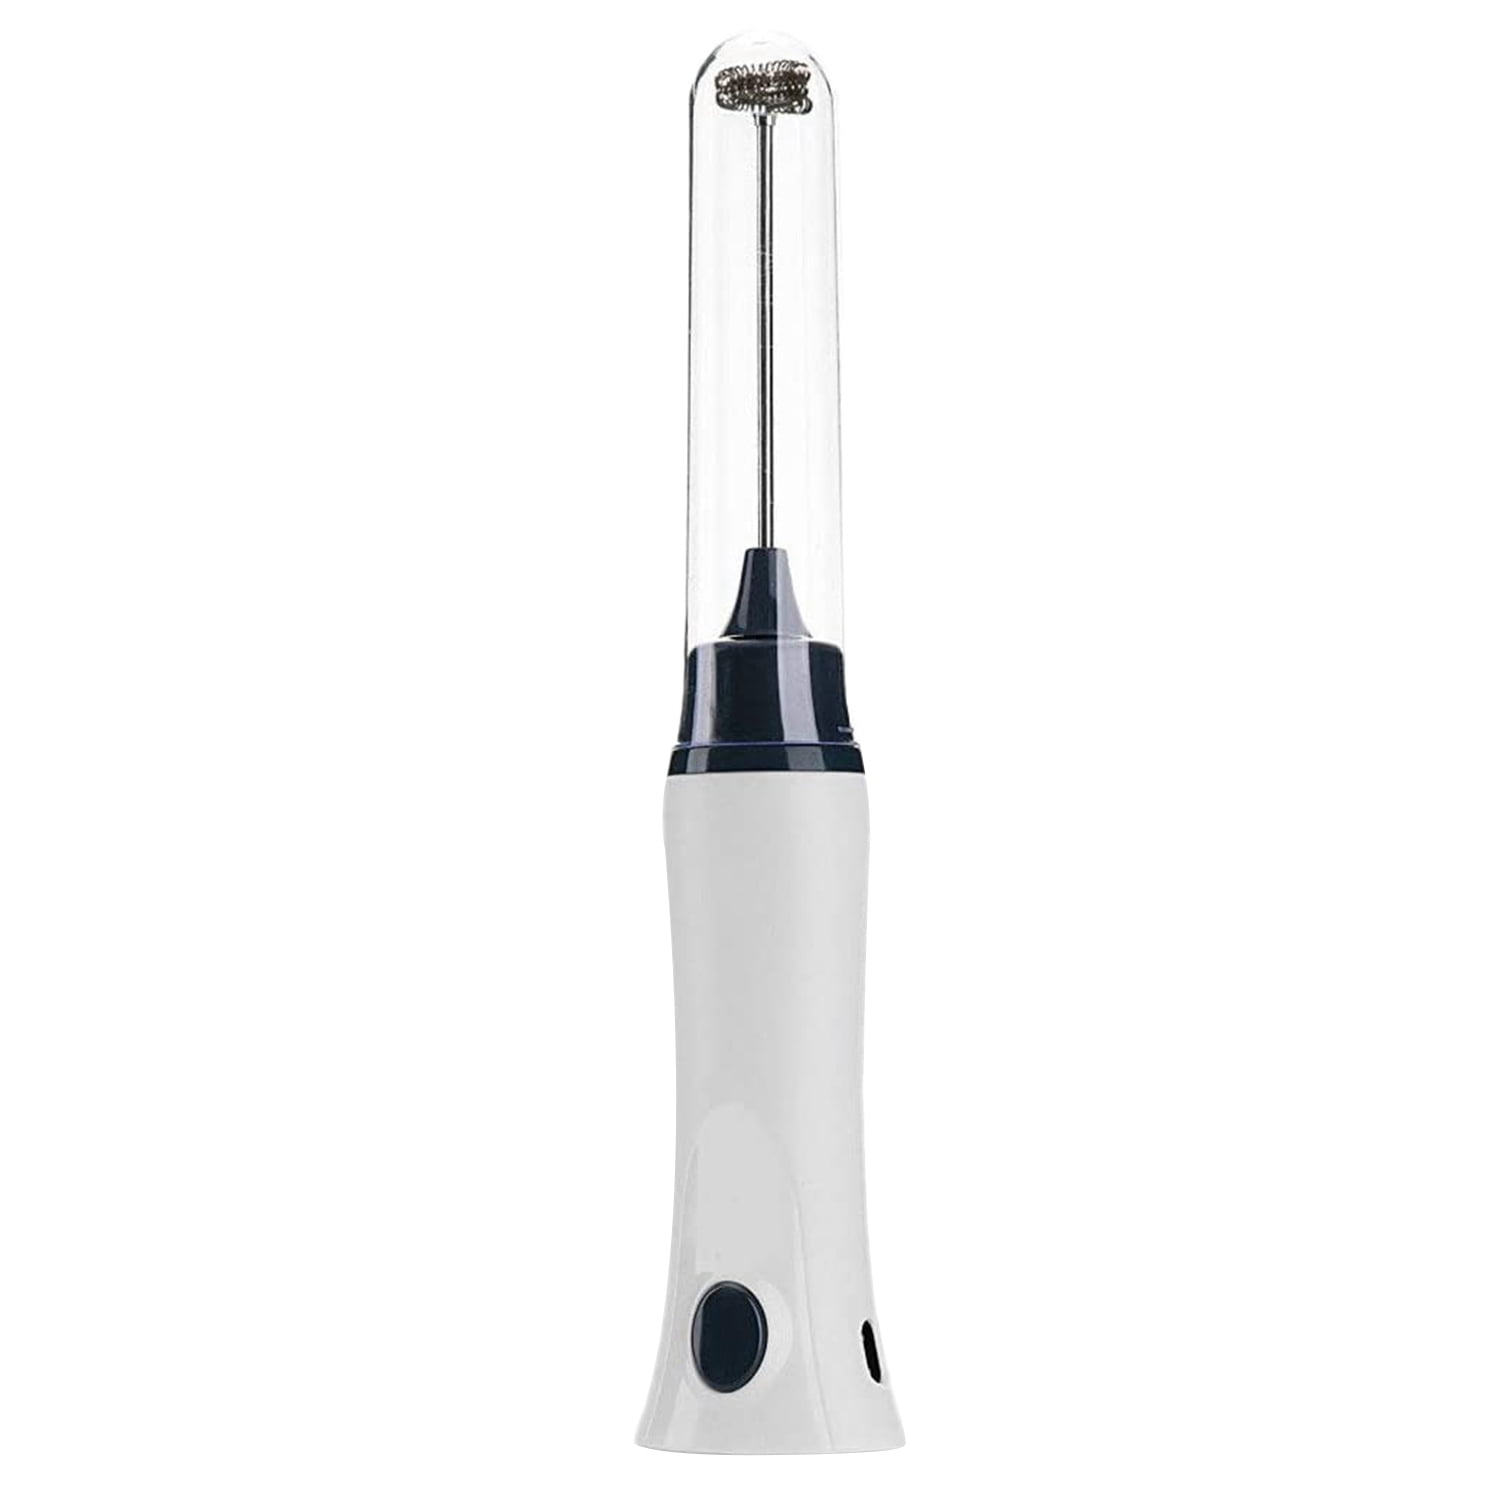 Milk Frother Handheld Detachable with Egg Beating Head, Stand. BLACK